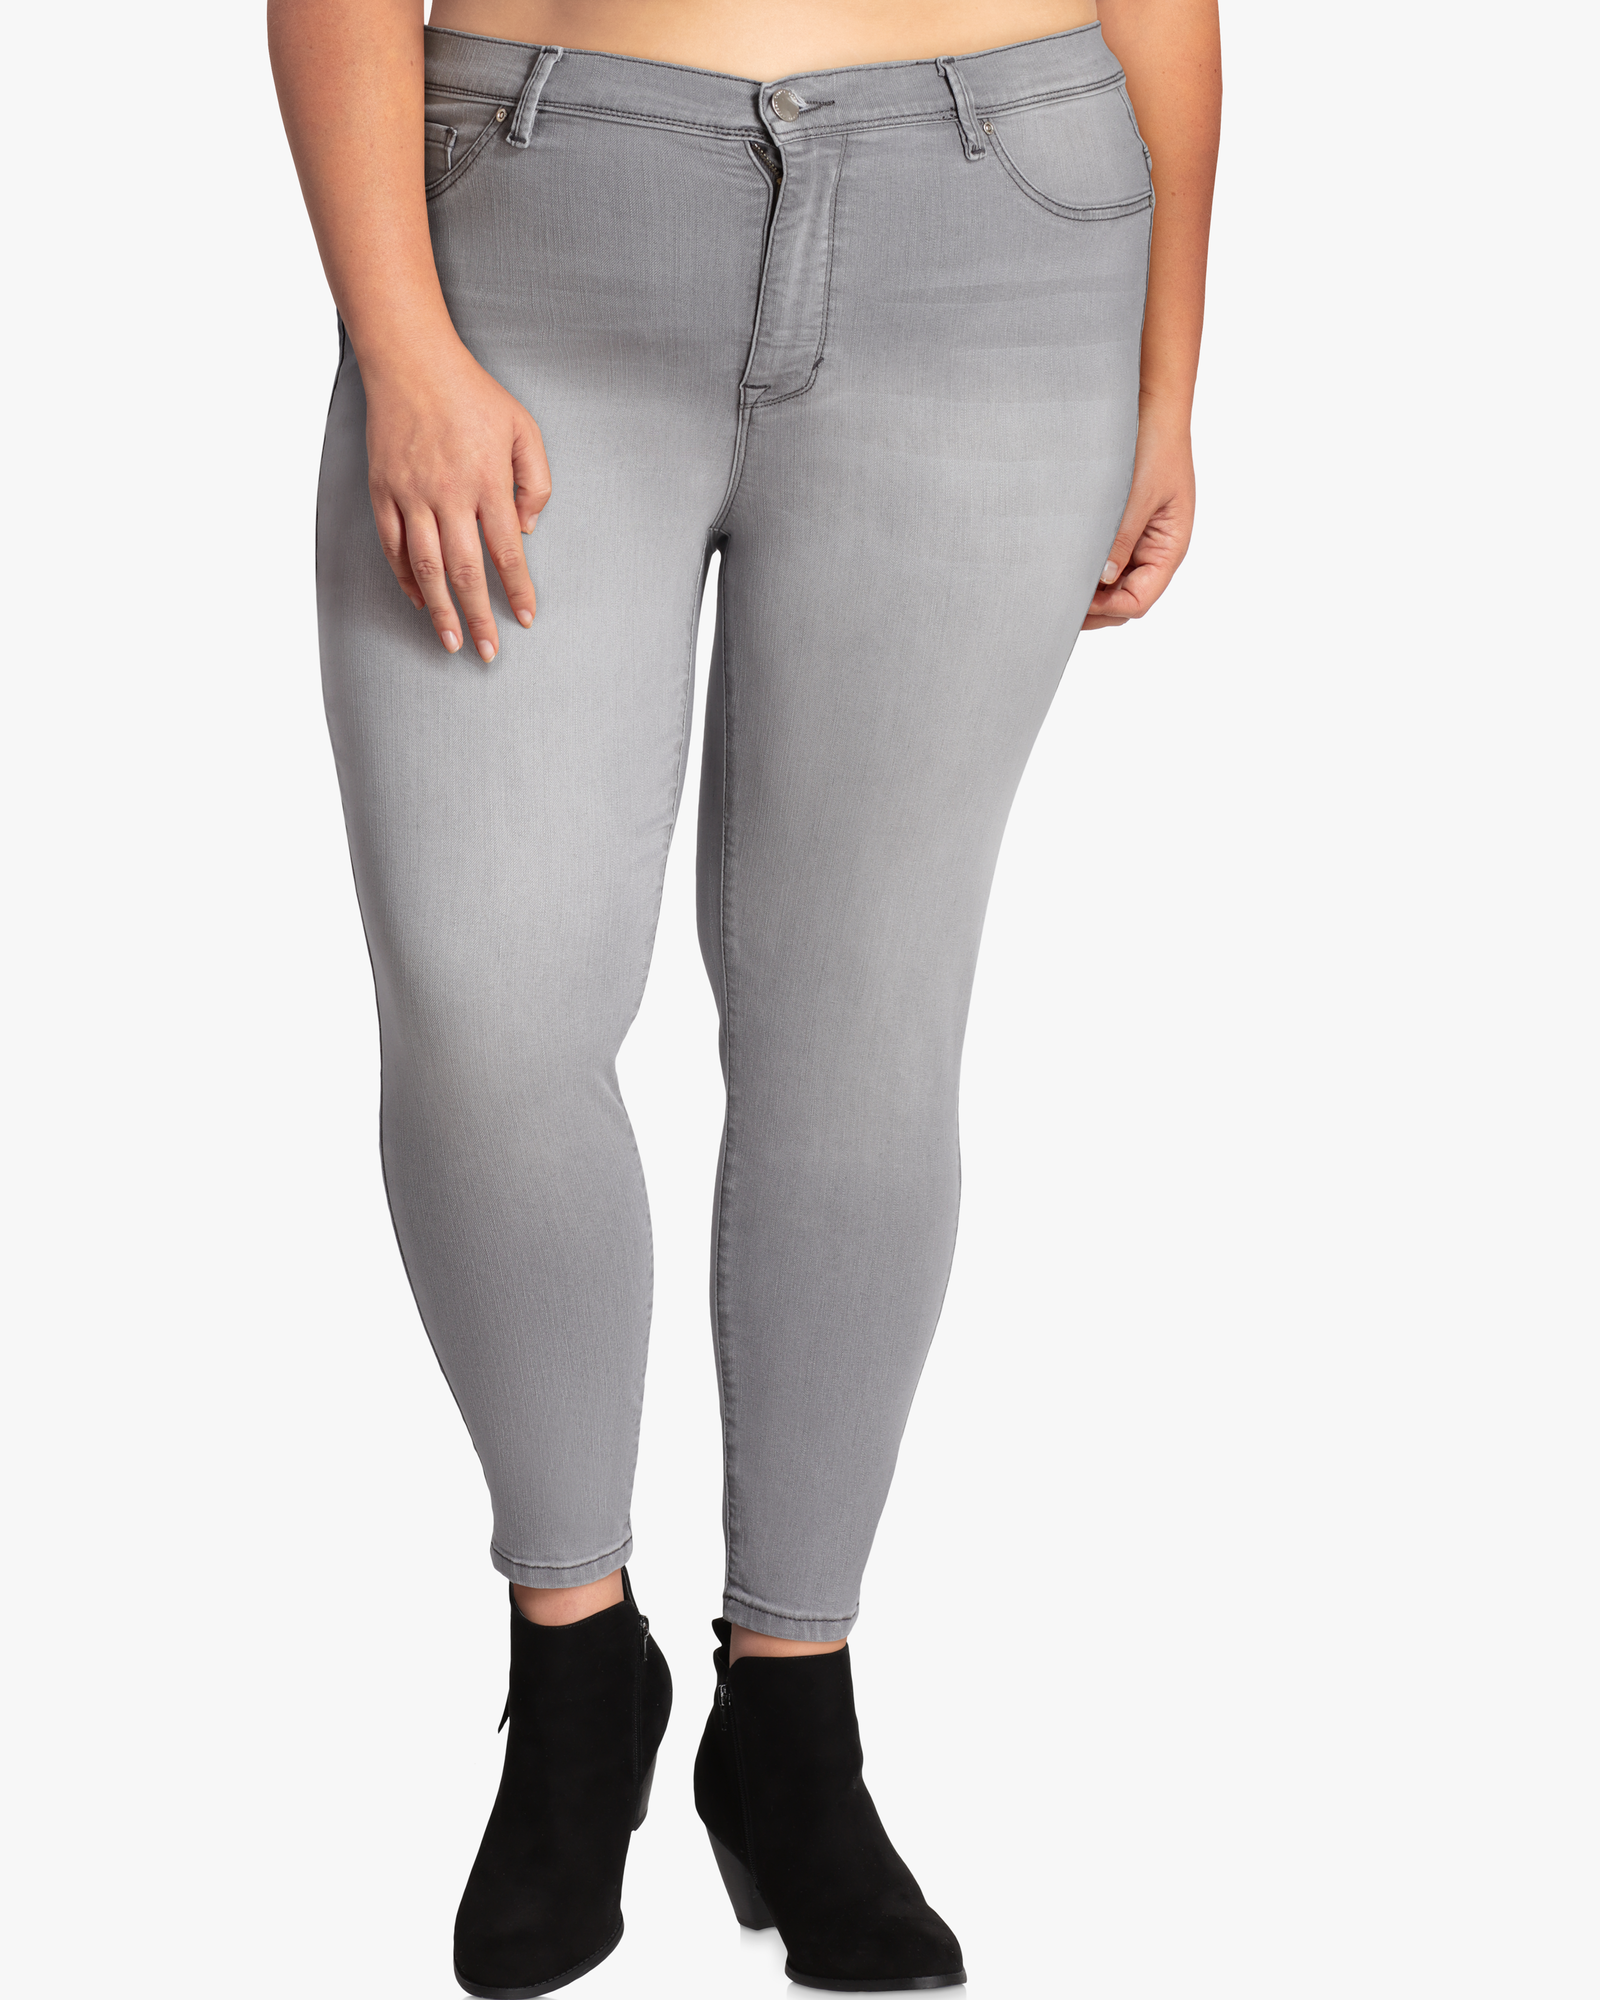 curve appeal skinny jeans